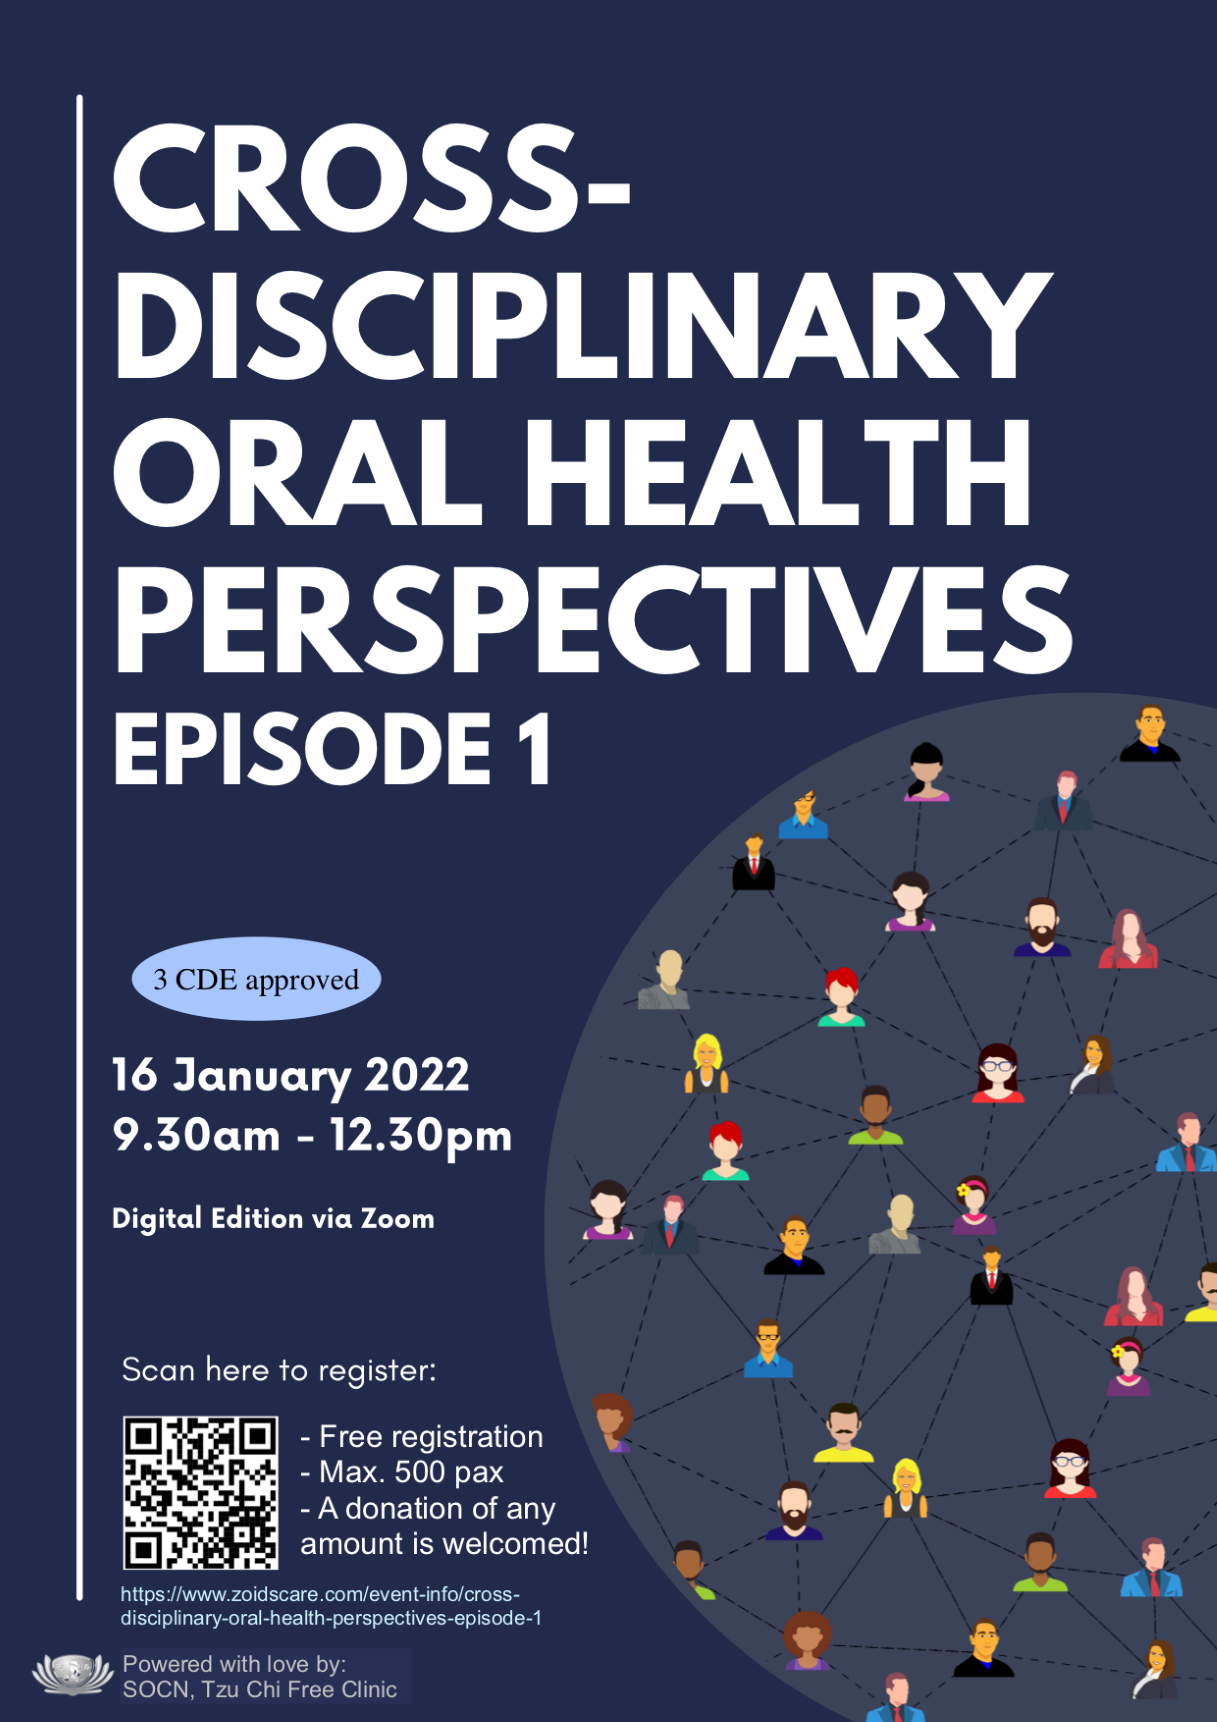 Cross-Disciplinary Oral Health Perspectives Episode 1  